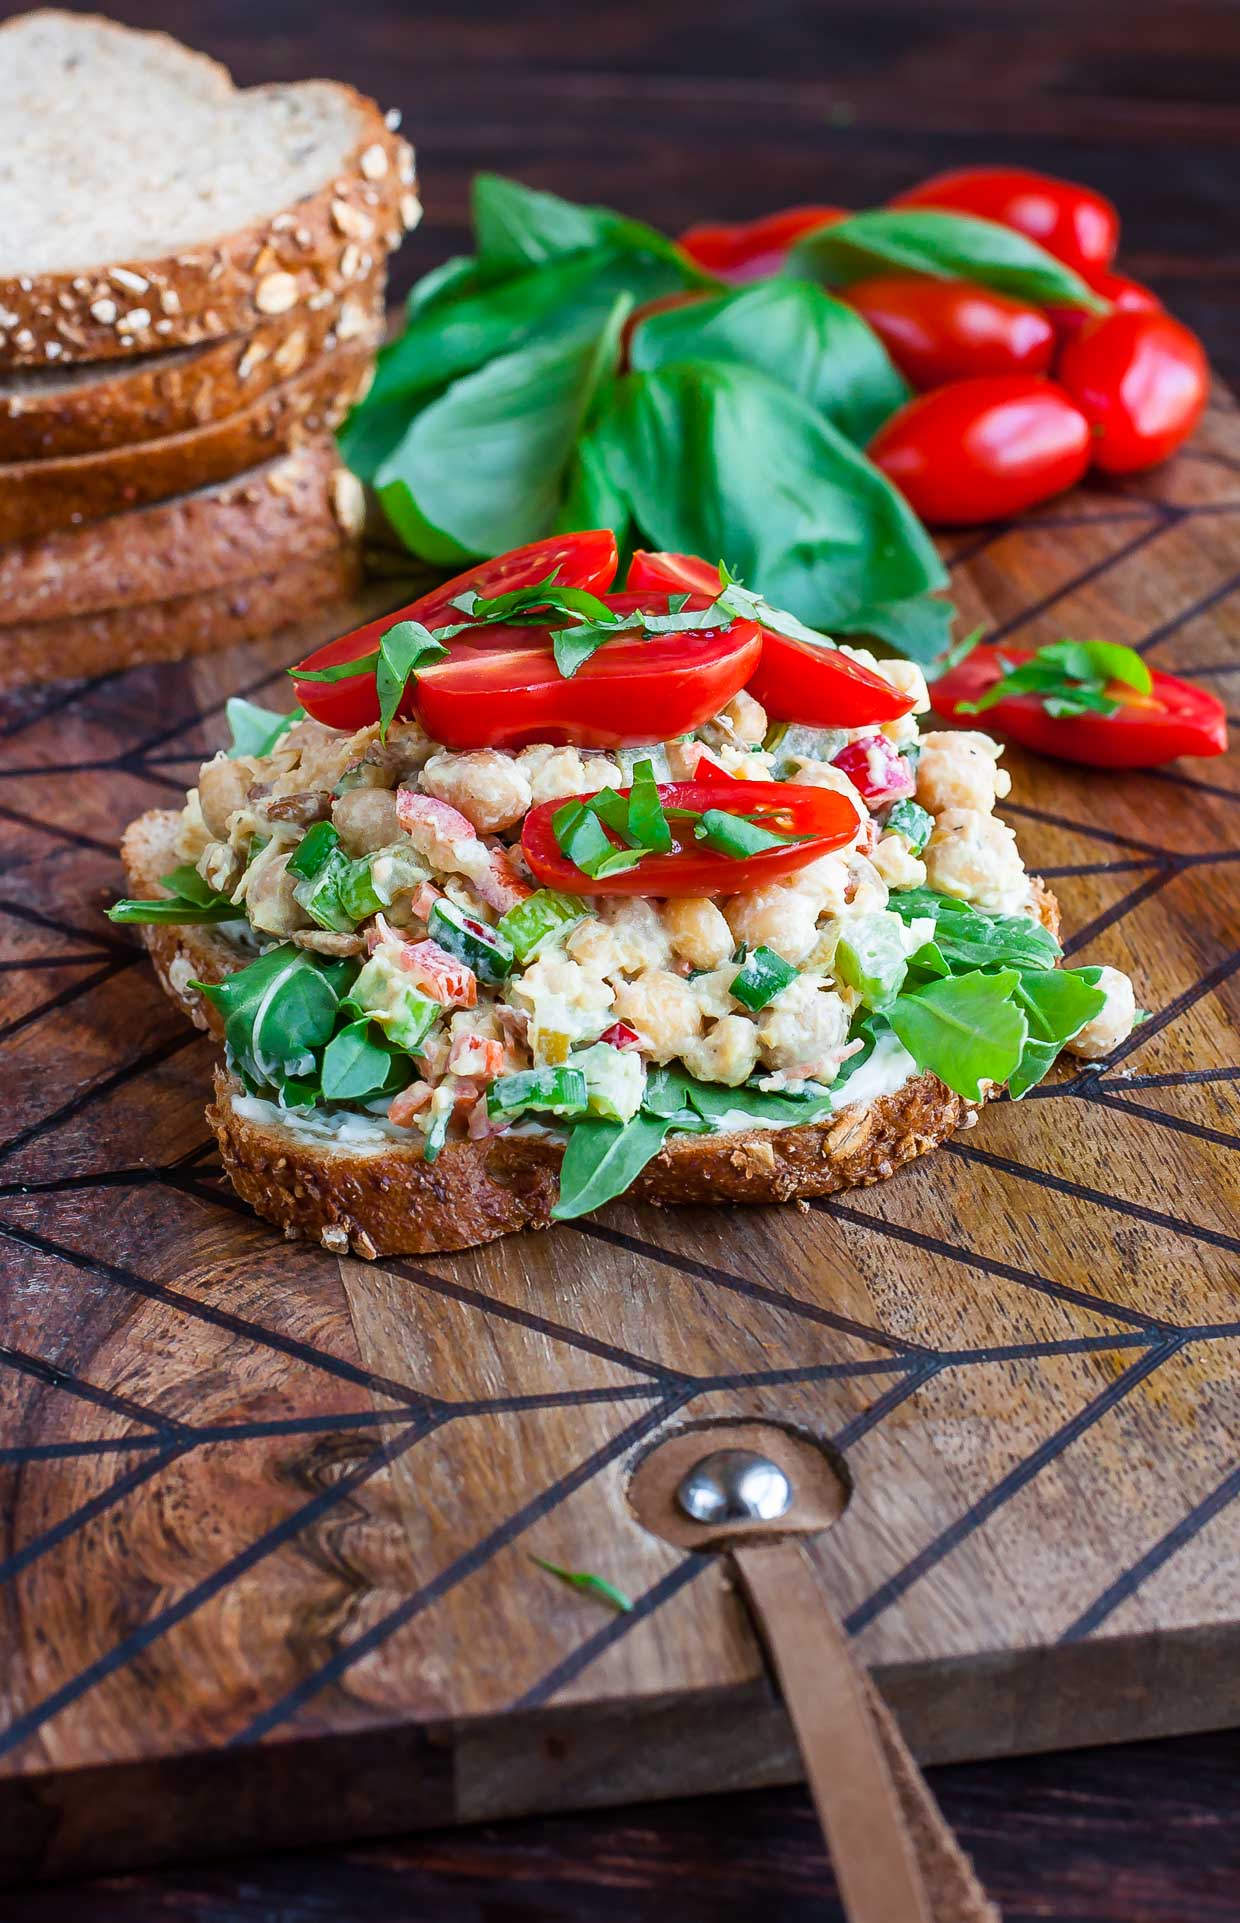 Tomato Basil Chickpea Salad Sandwich FTW! Whip up this scrumptious chickpea salad in advance for speedy make-ahead lunches or picnic eats.